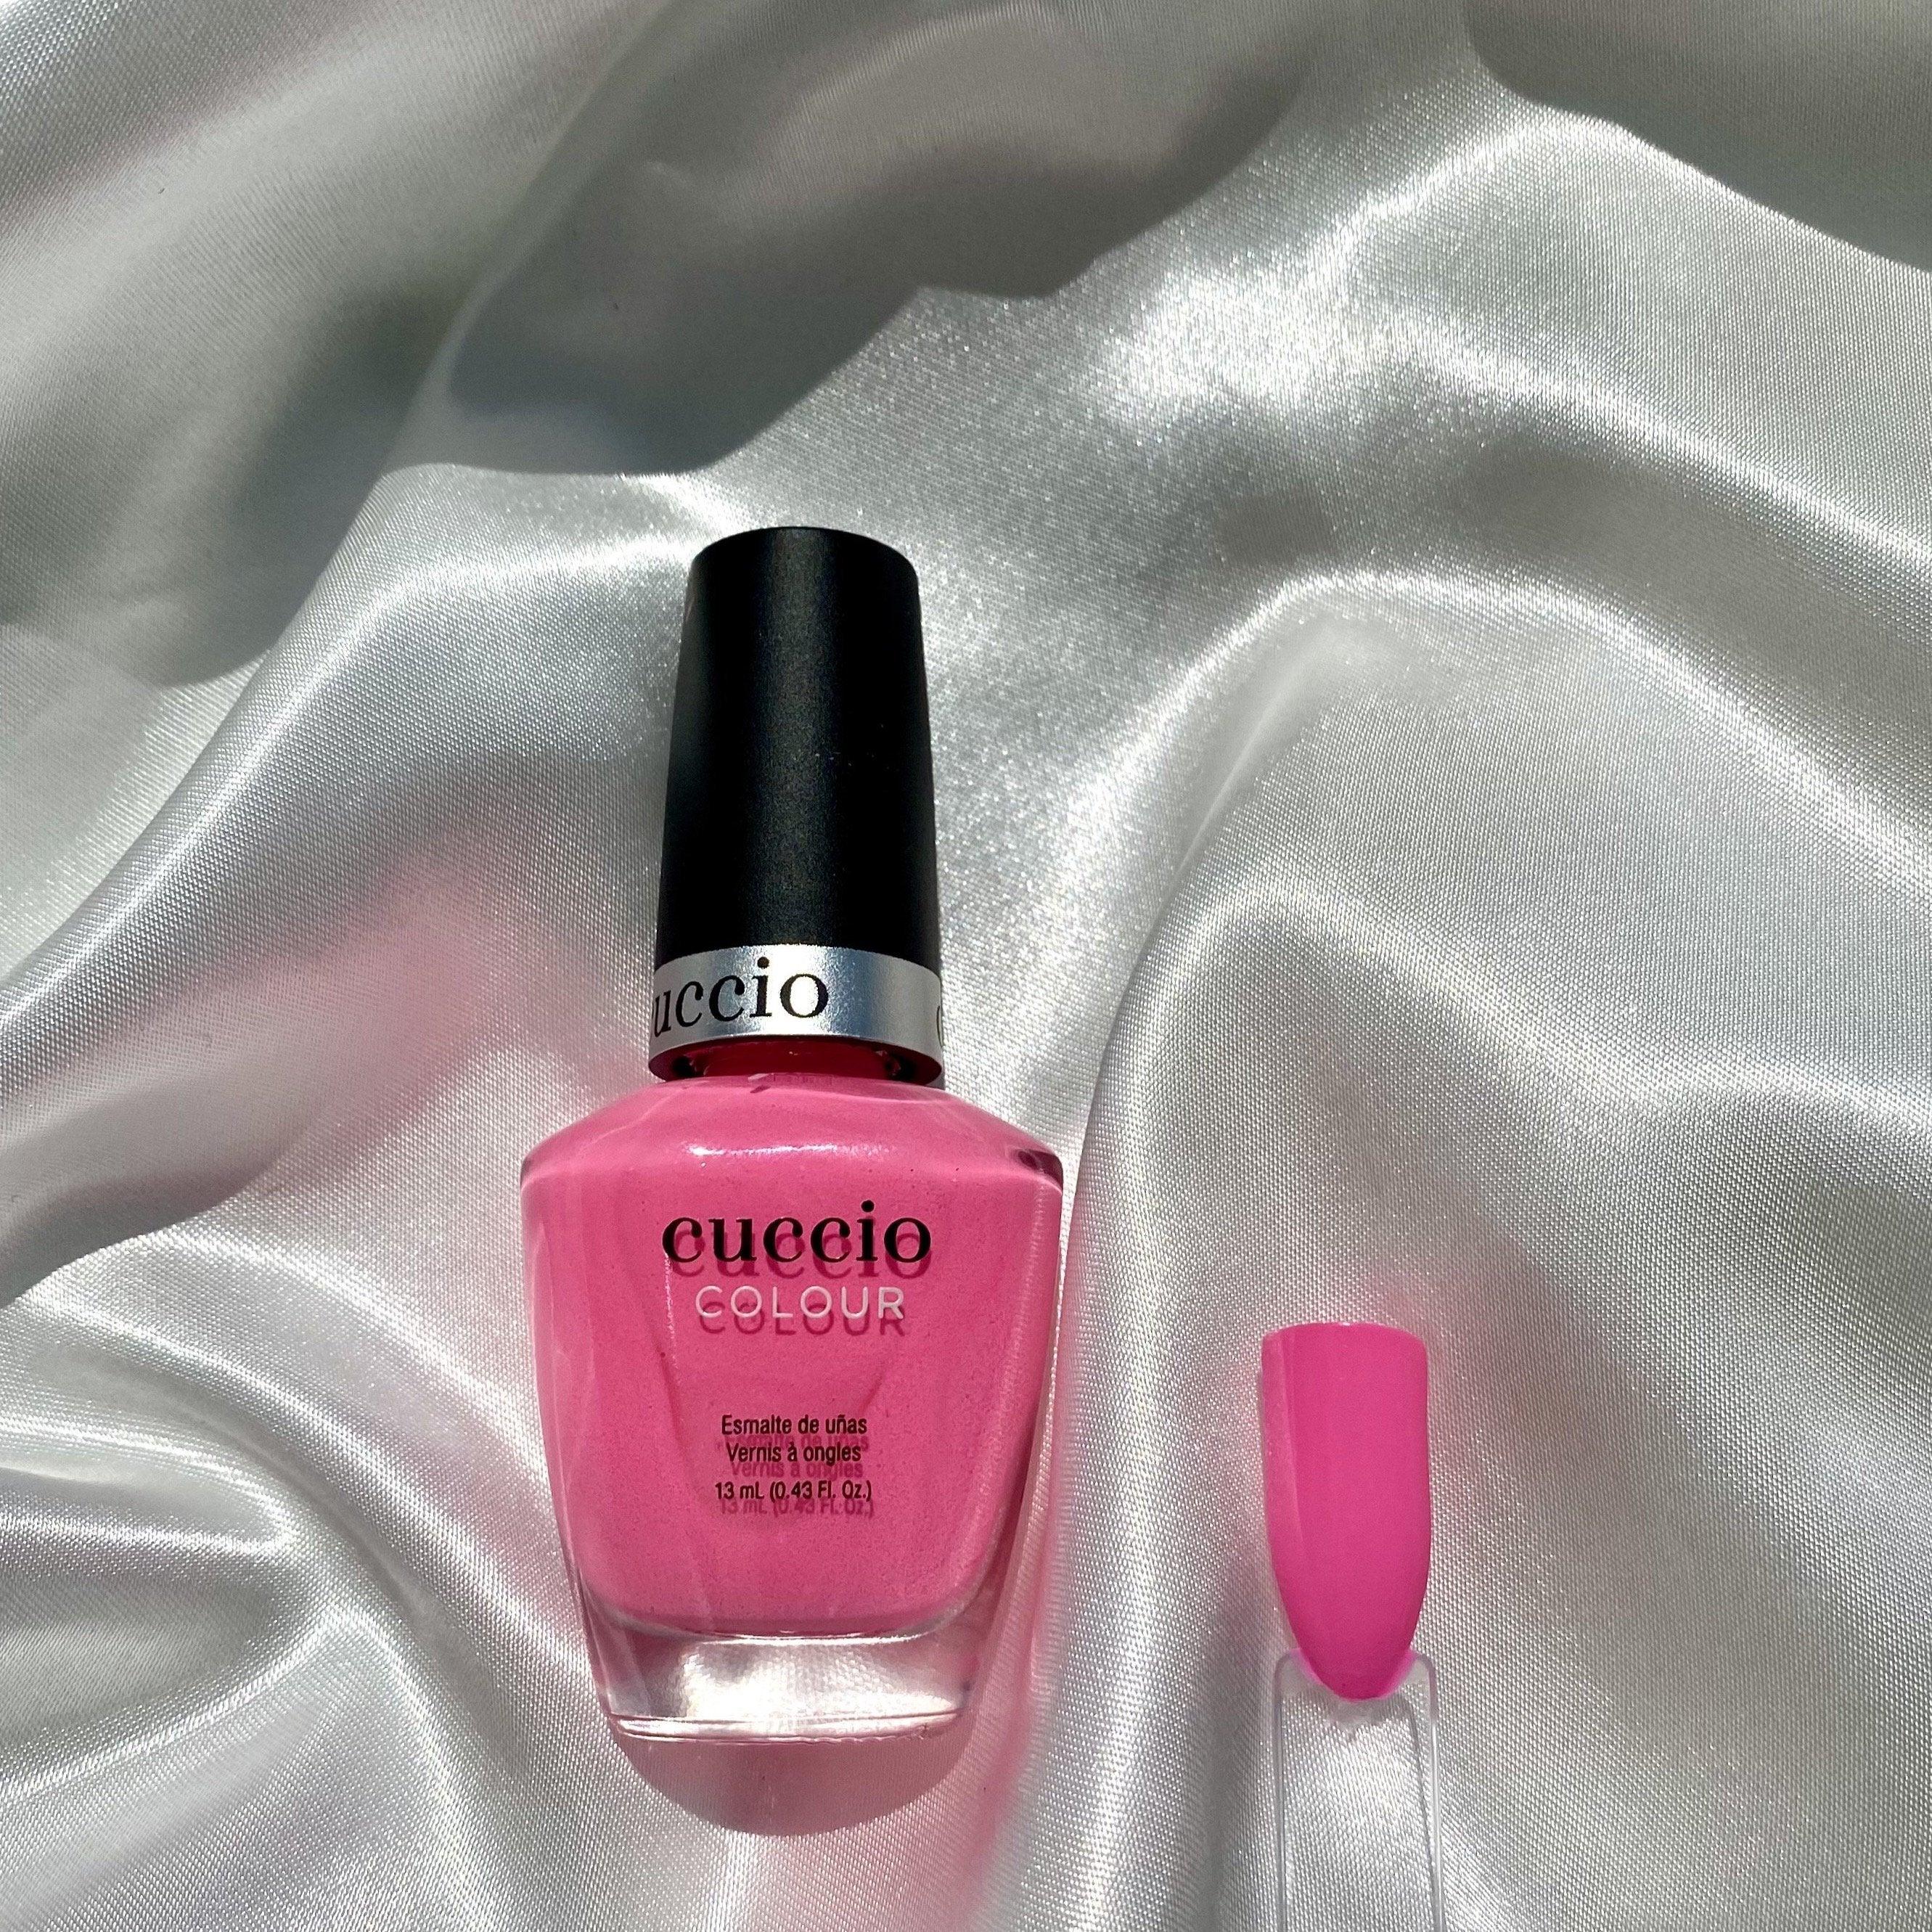 Vernis à ongles CUCCIO - All Products - L'abc du maquillage